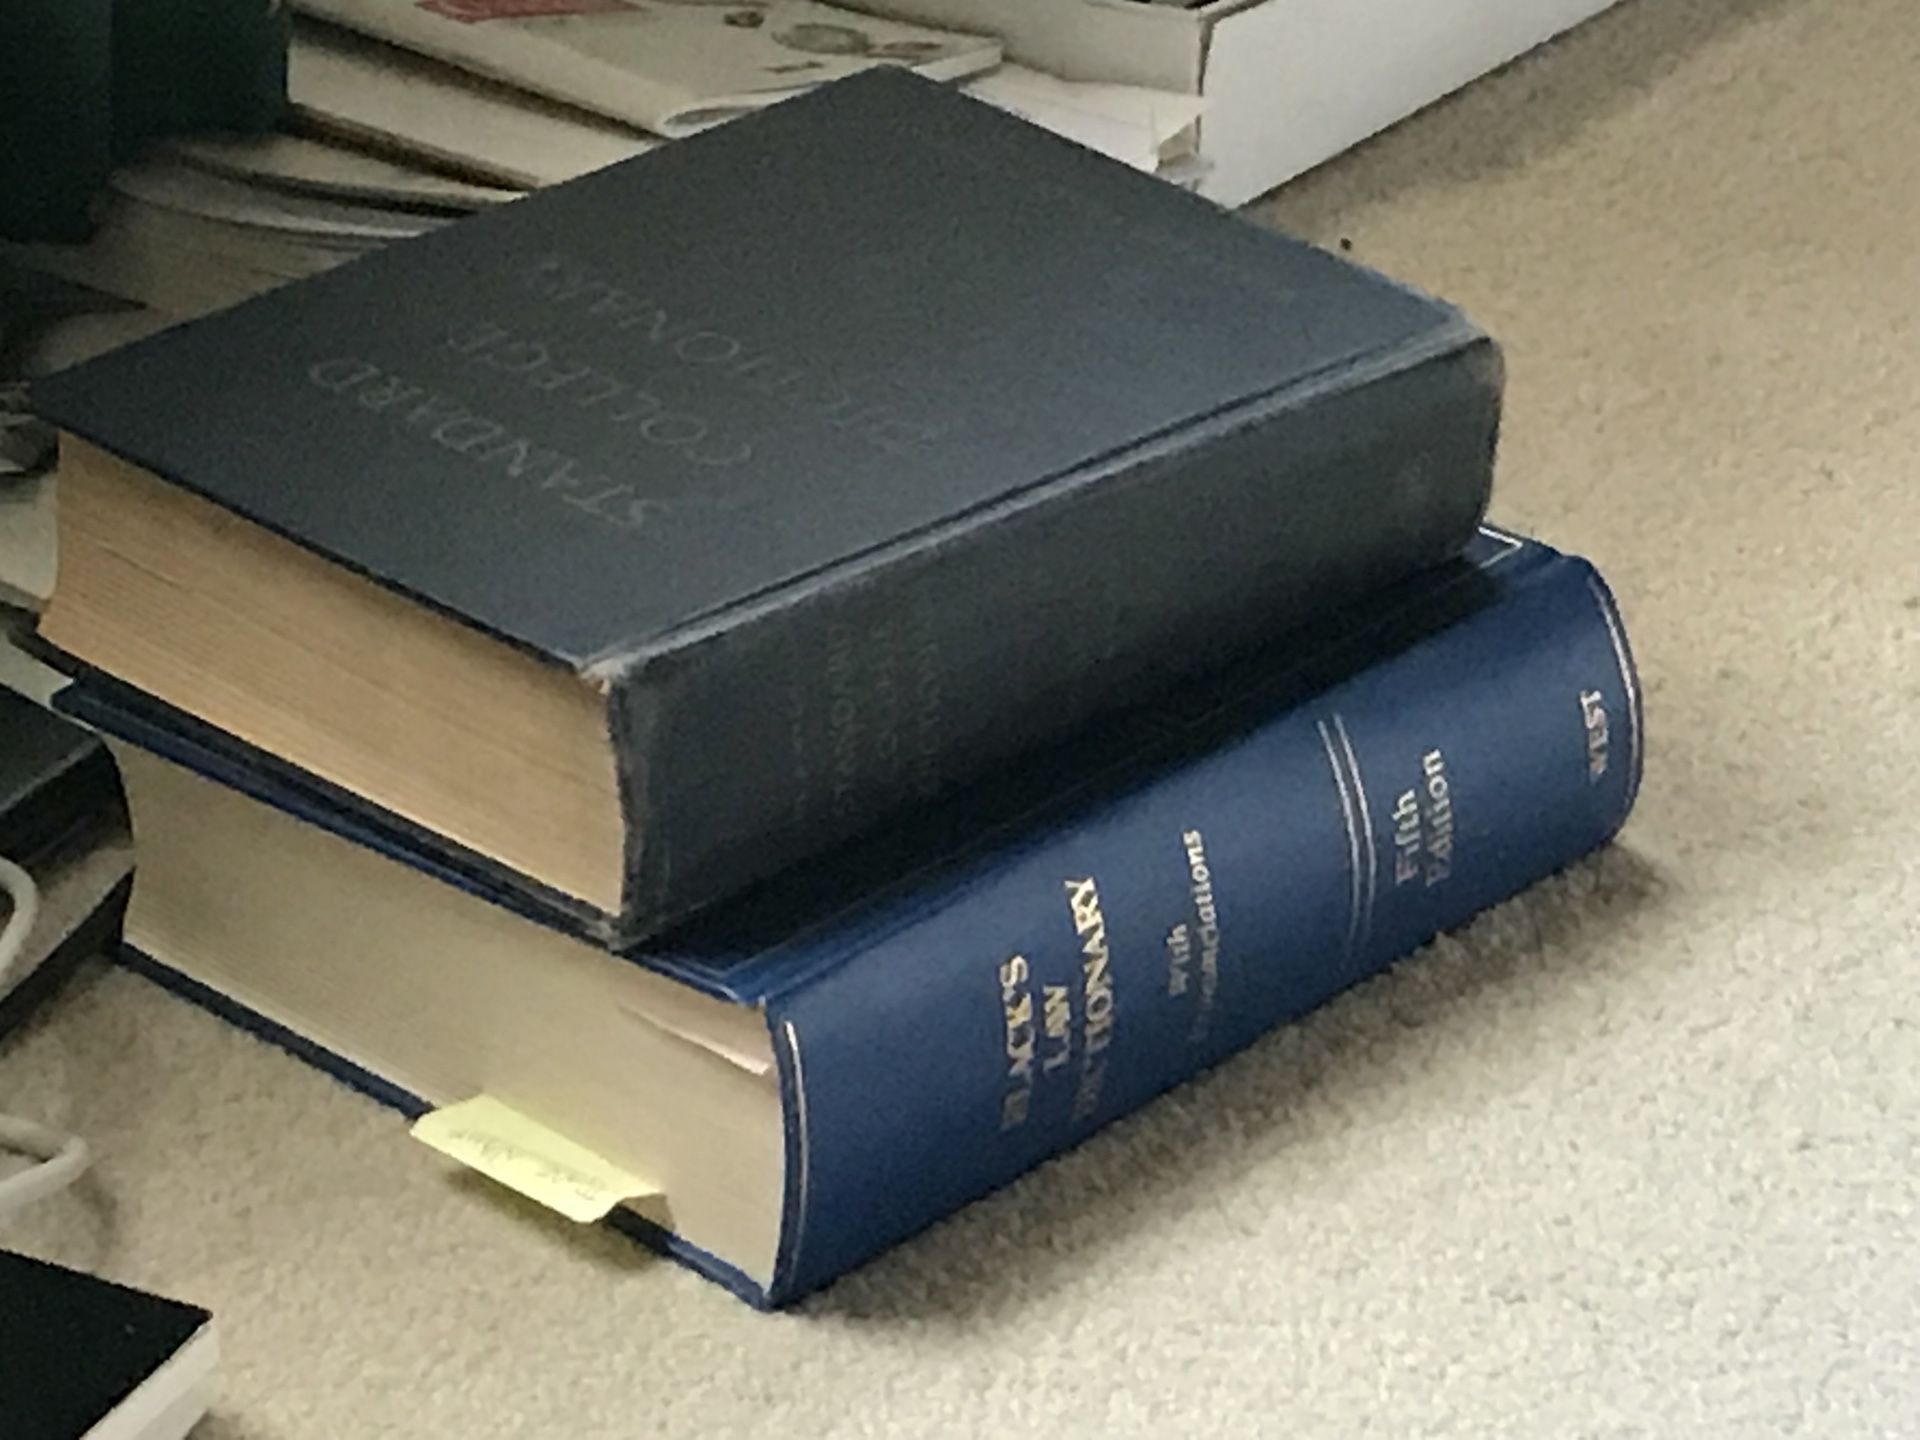 Standard College Dictionary, and Black’s Law Dictionary.